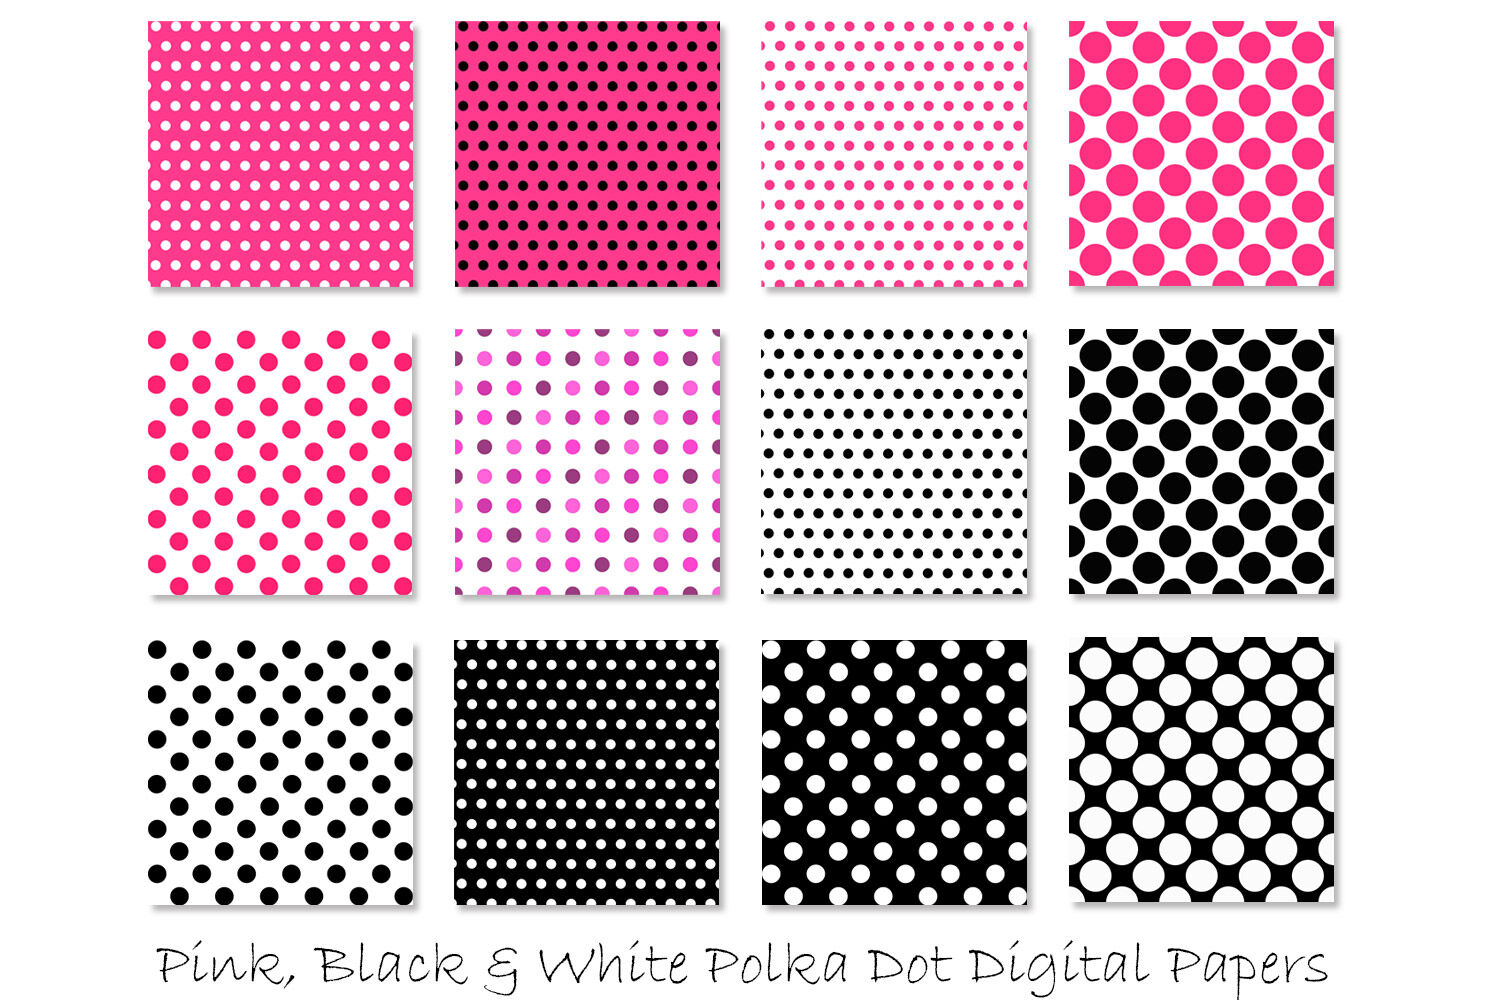 3. Baby Blue and Pink Polka Dot Design - wide 6